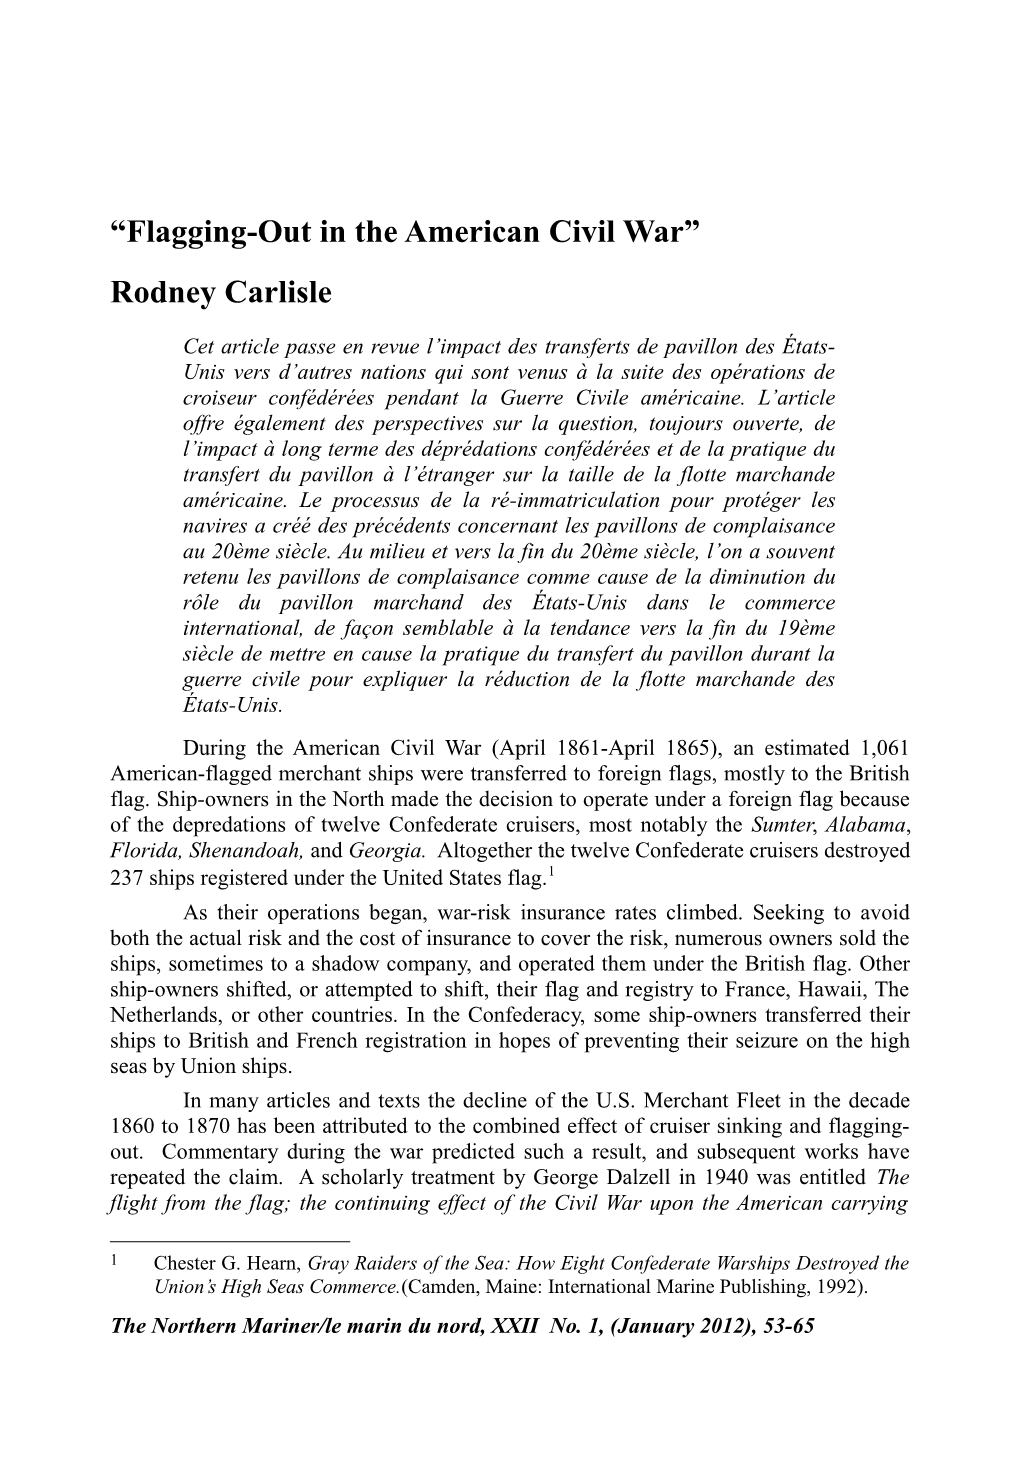 “Flagging-Out in the American Civil War” Rodney Carlisle